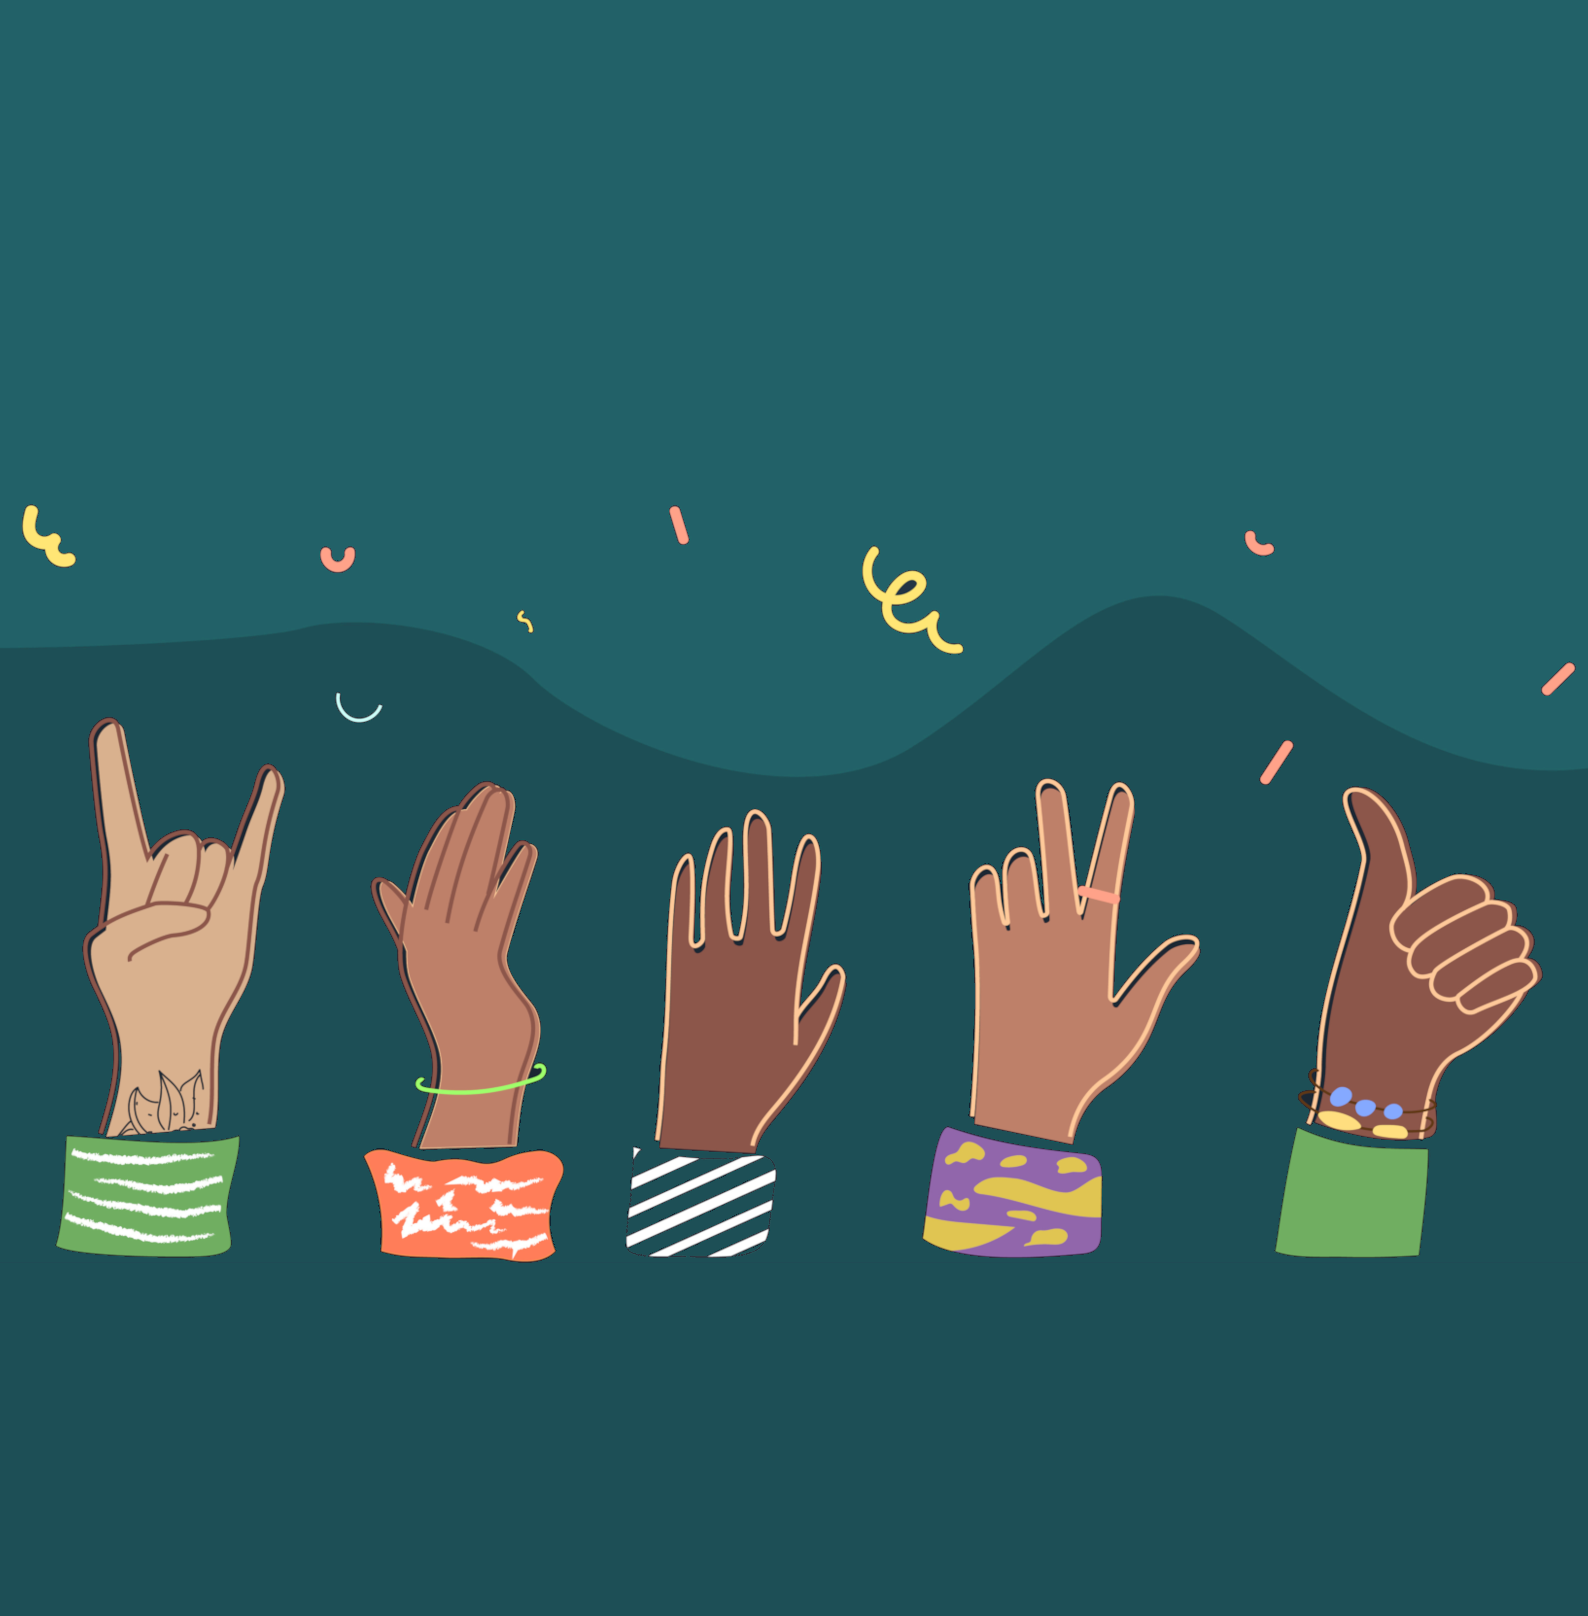 an illustration of hands from various cultural backgrounds